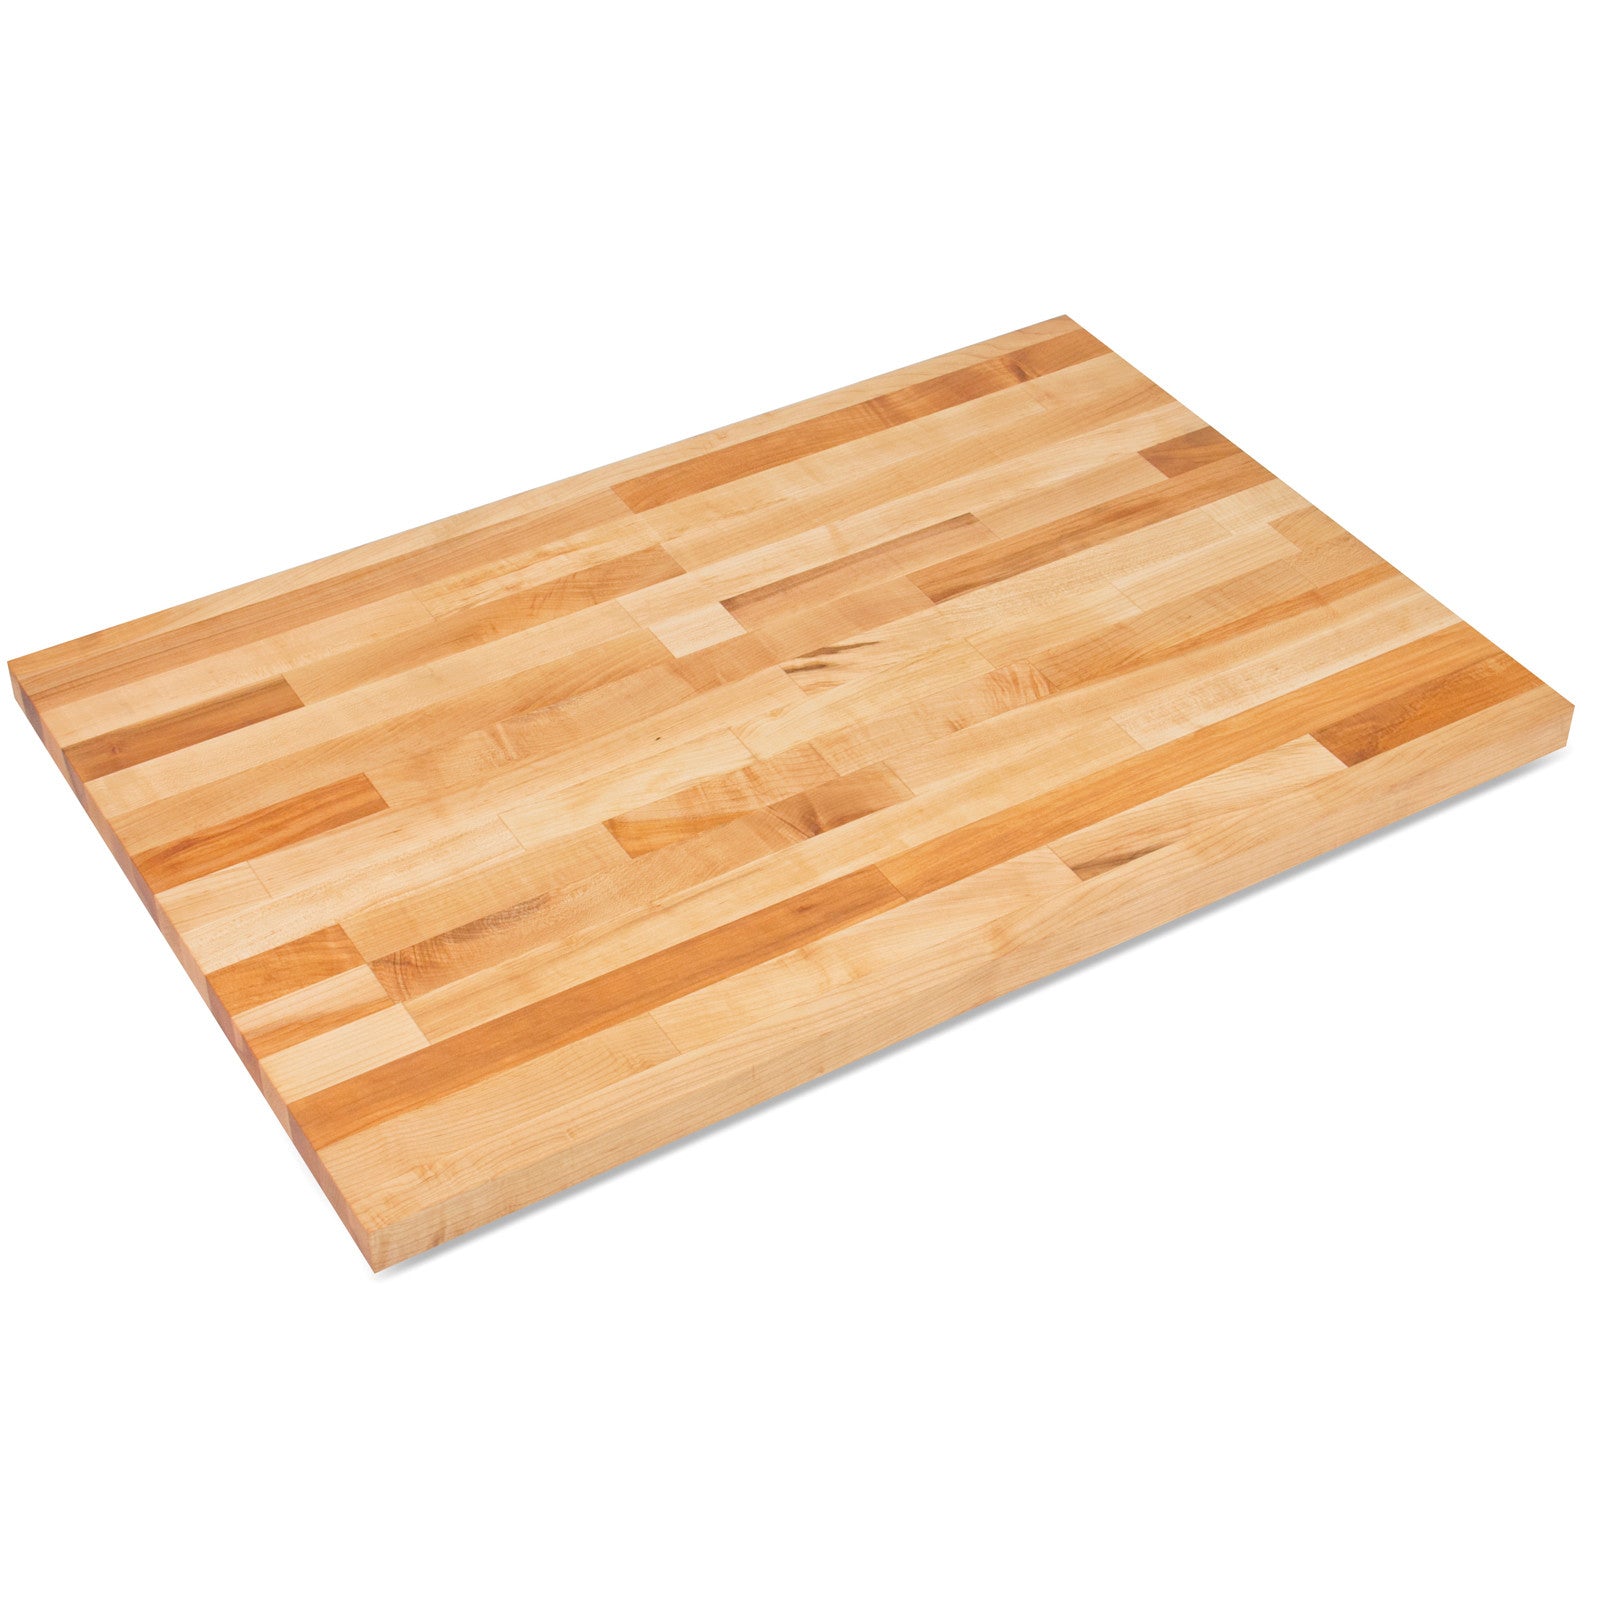 John Boos SC012-O Maple 1 3/4" Thick Replacement Top - 60 X 30 X 1.75